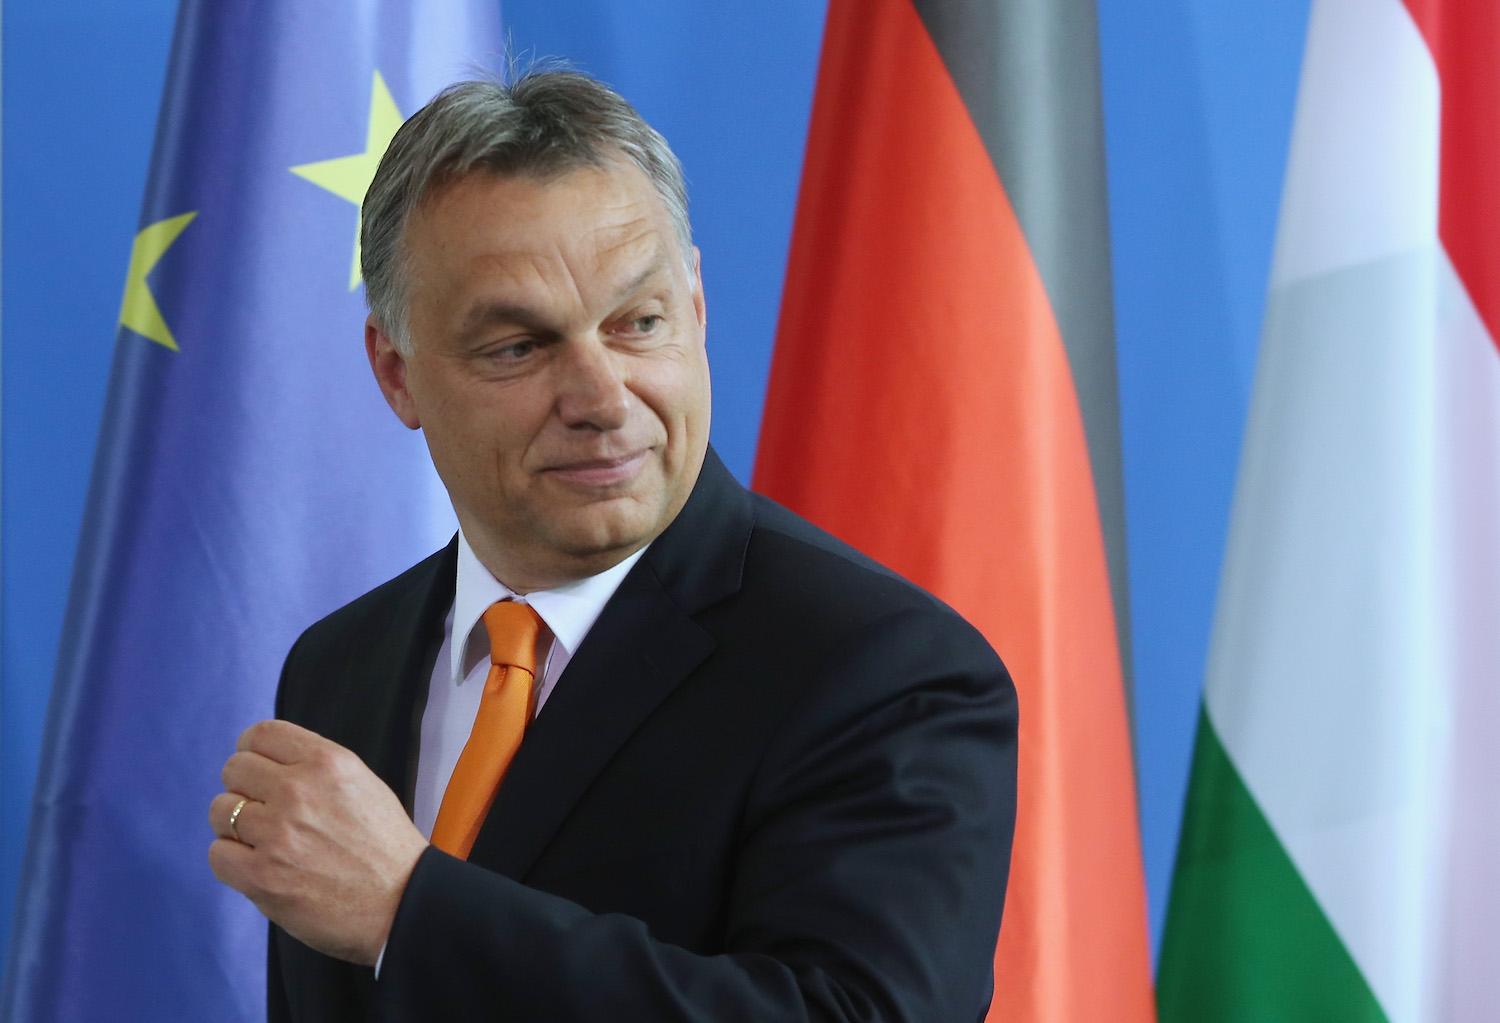 Hungarian Prime Minister Viktor Orbán launched a two-pronged attack on migration and the coronavirus.